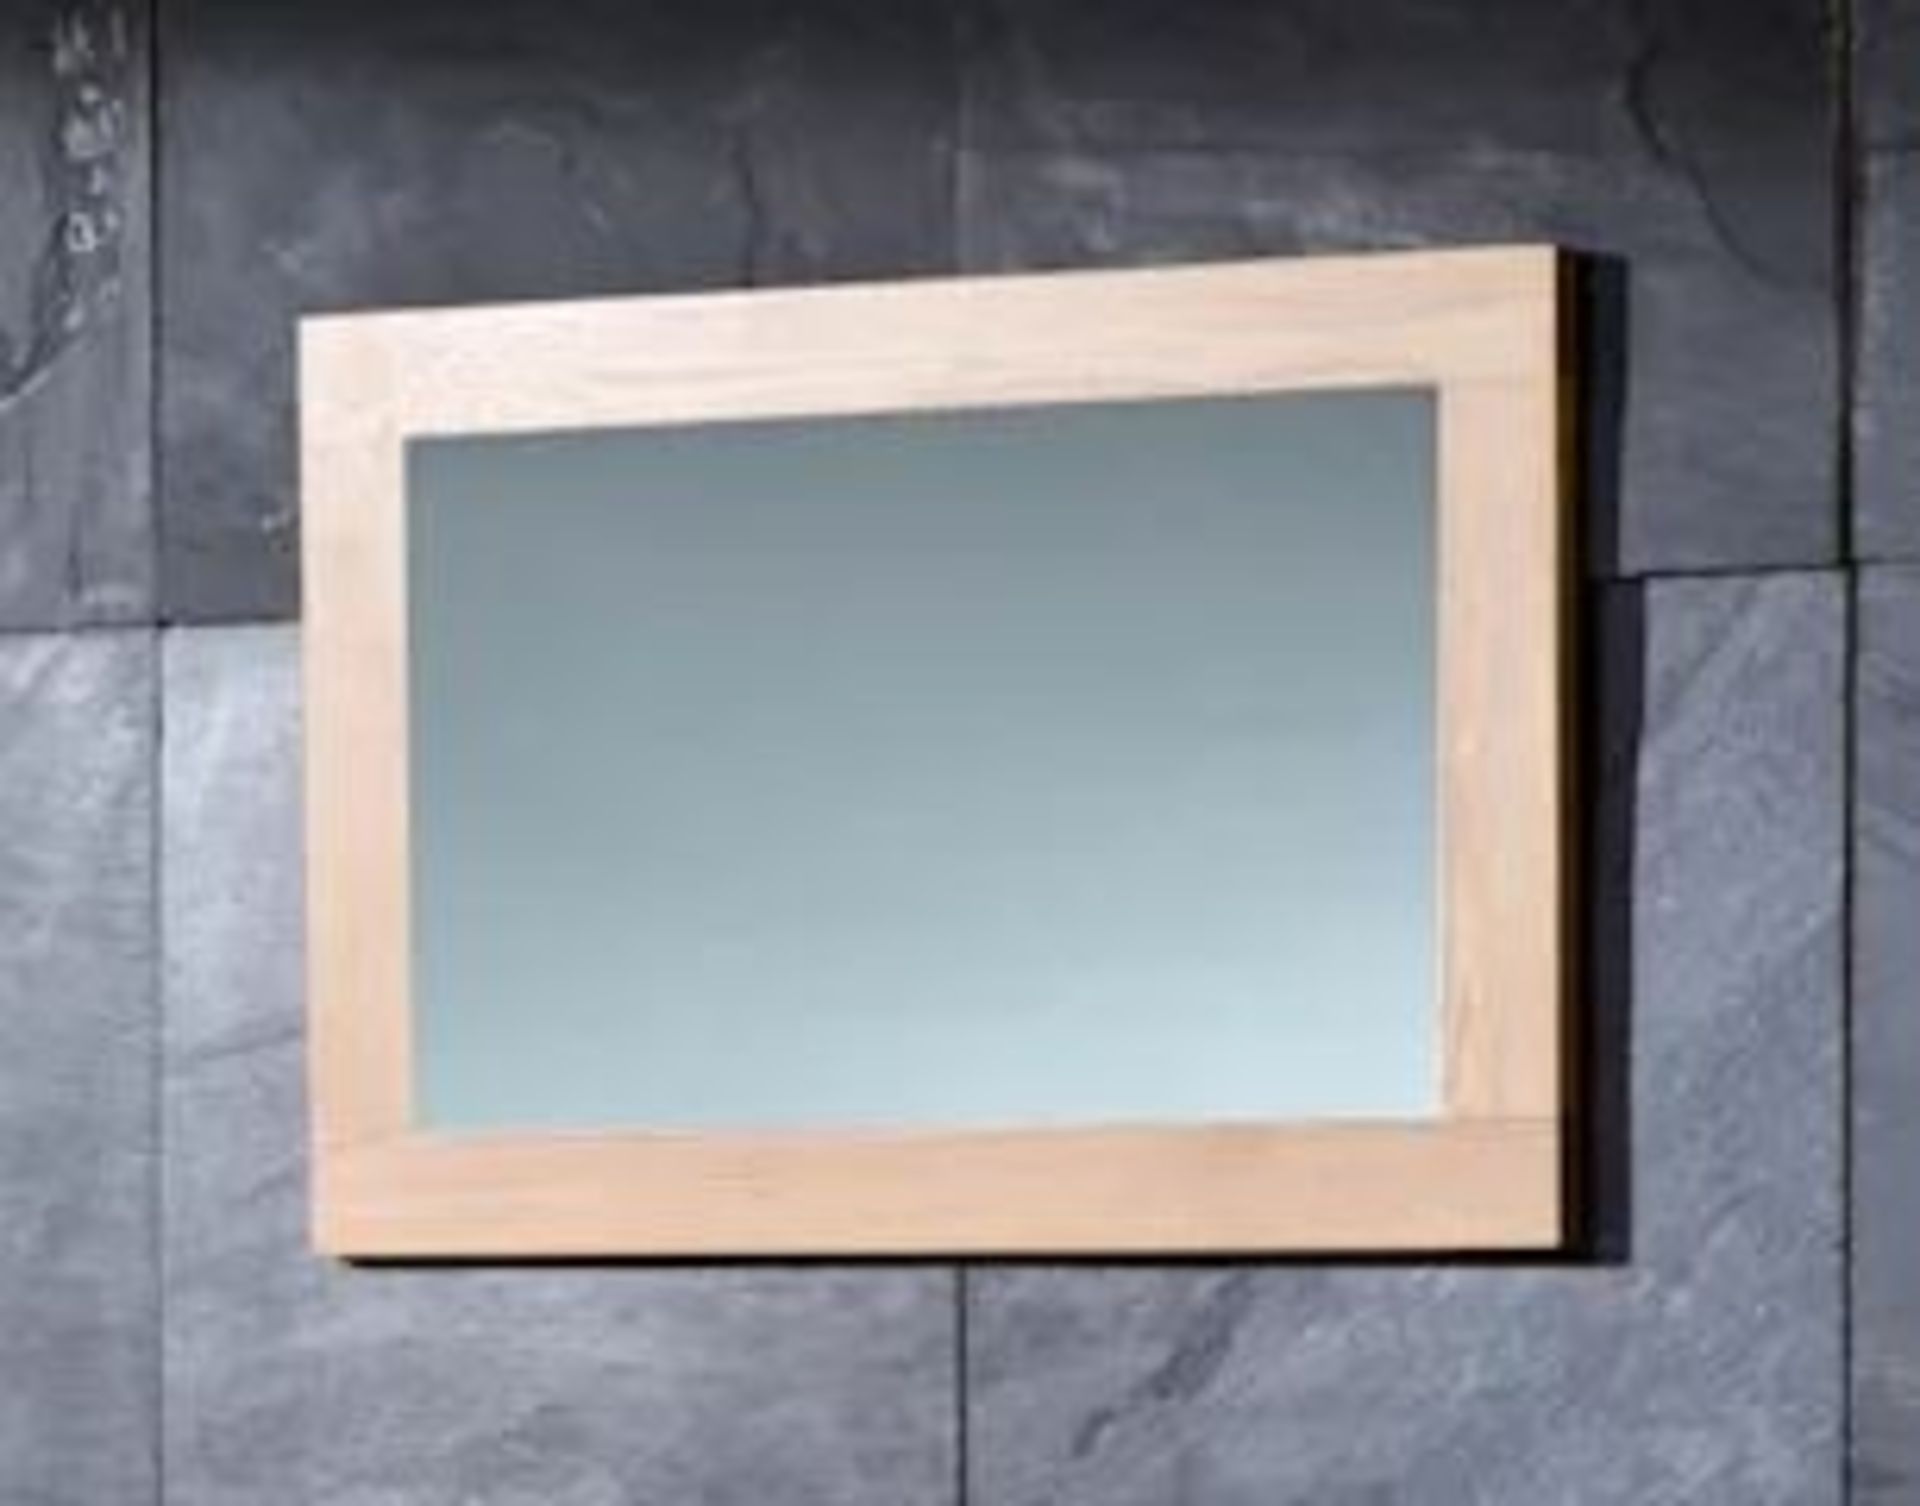 1 x Stonearth Medium Wall Mirror Frame - American Solid Oak Frame For Mirrors or Pictures - Image 8 of 12